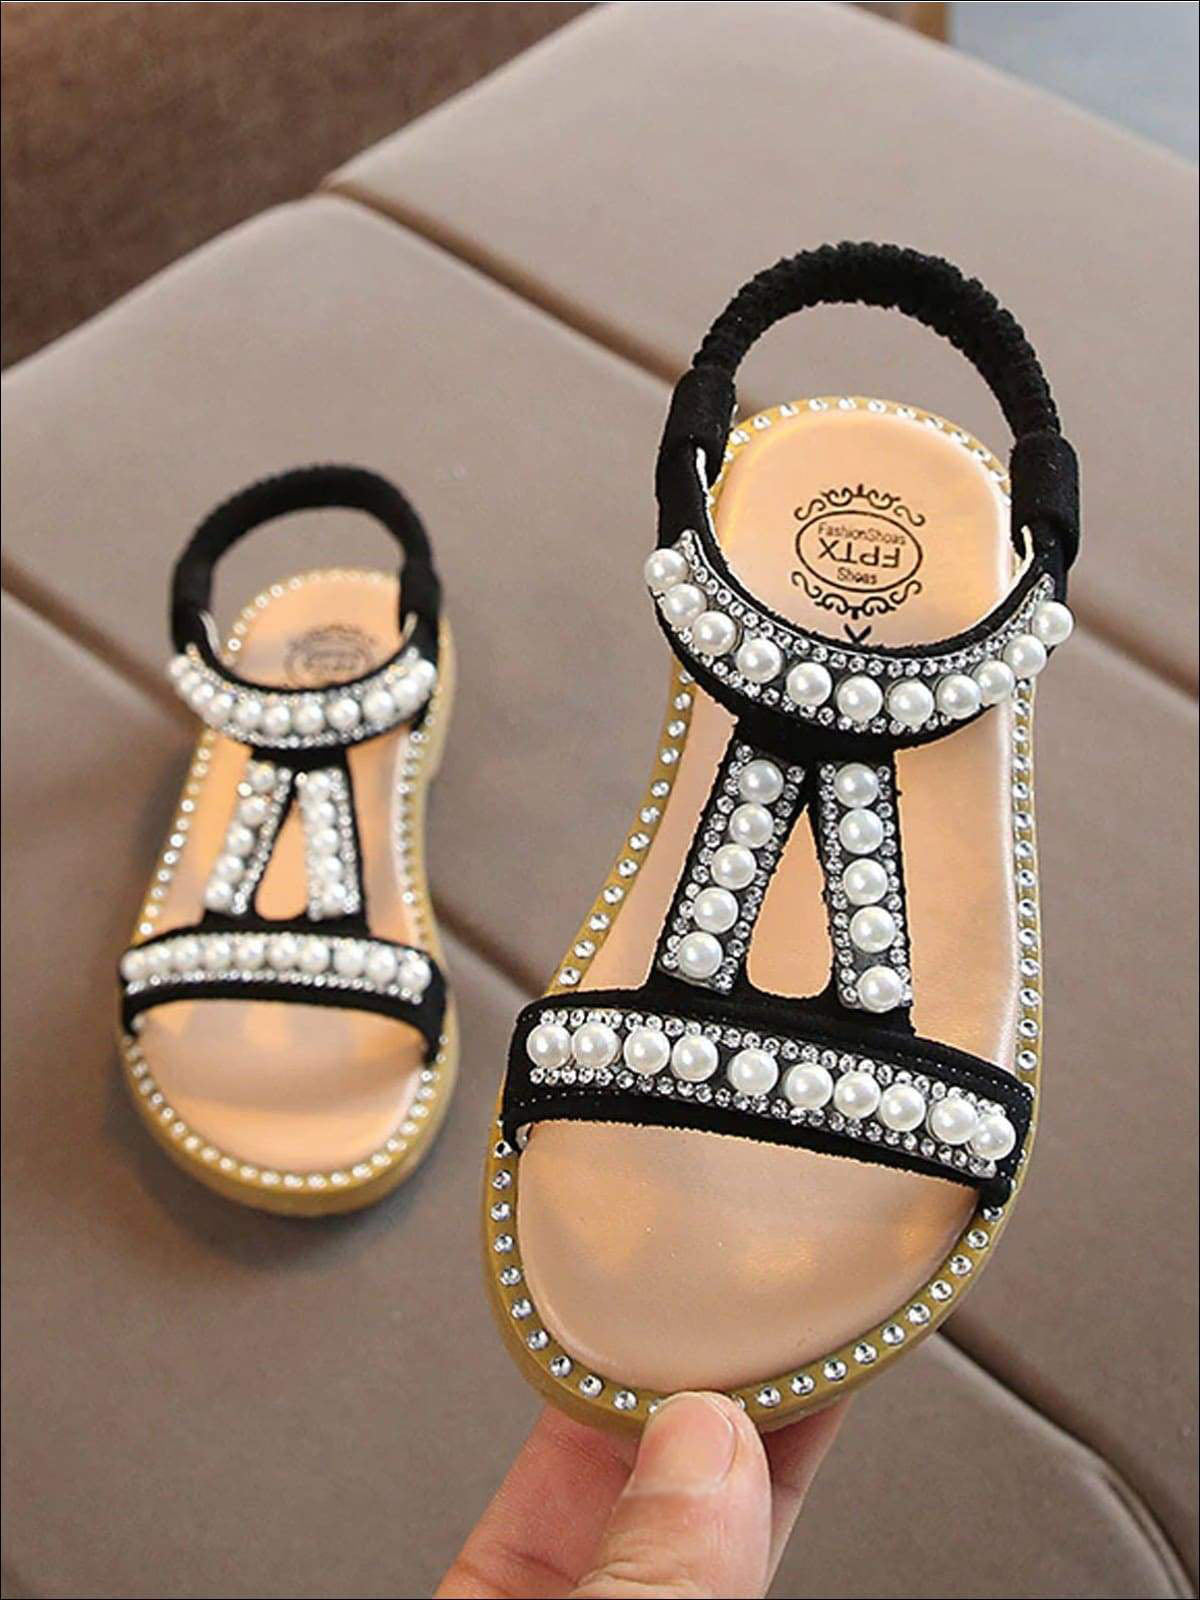 Mia Belle Girls Pearl Embellished Sandals | Shoes By Liv and Mia